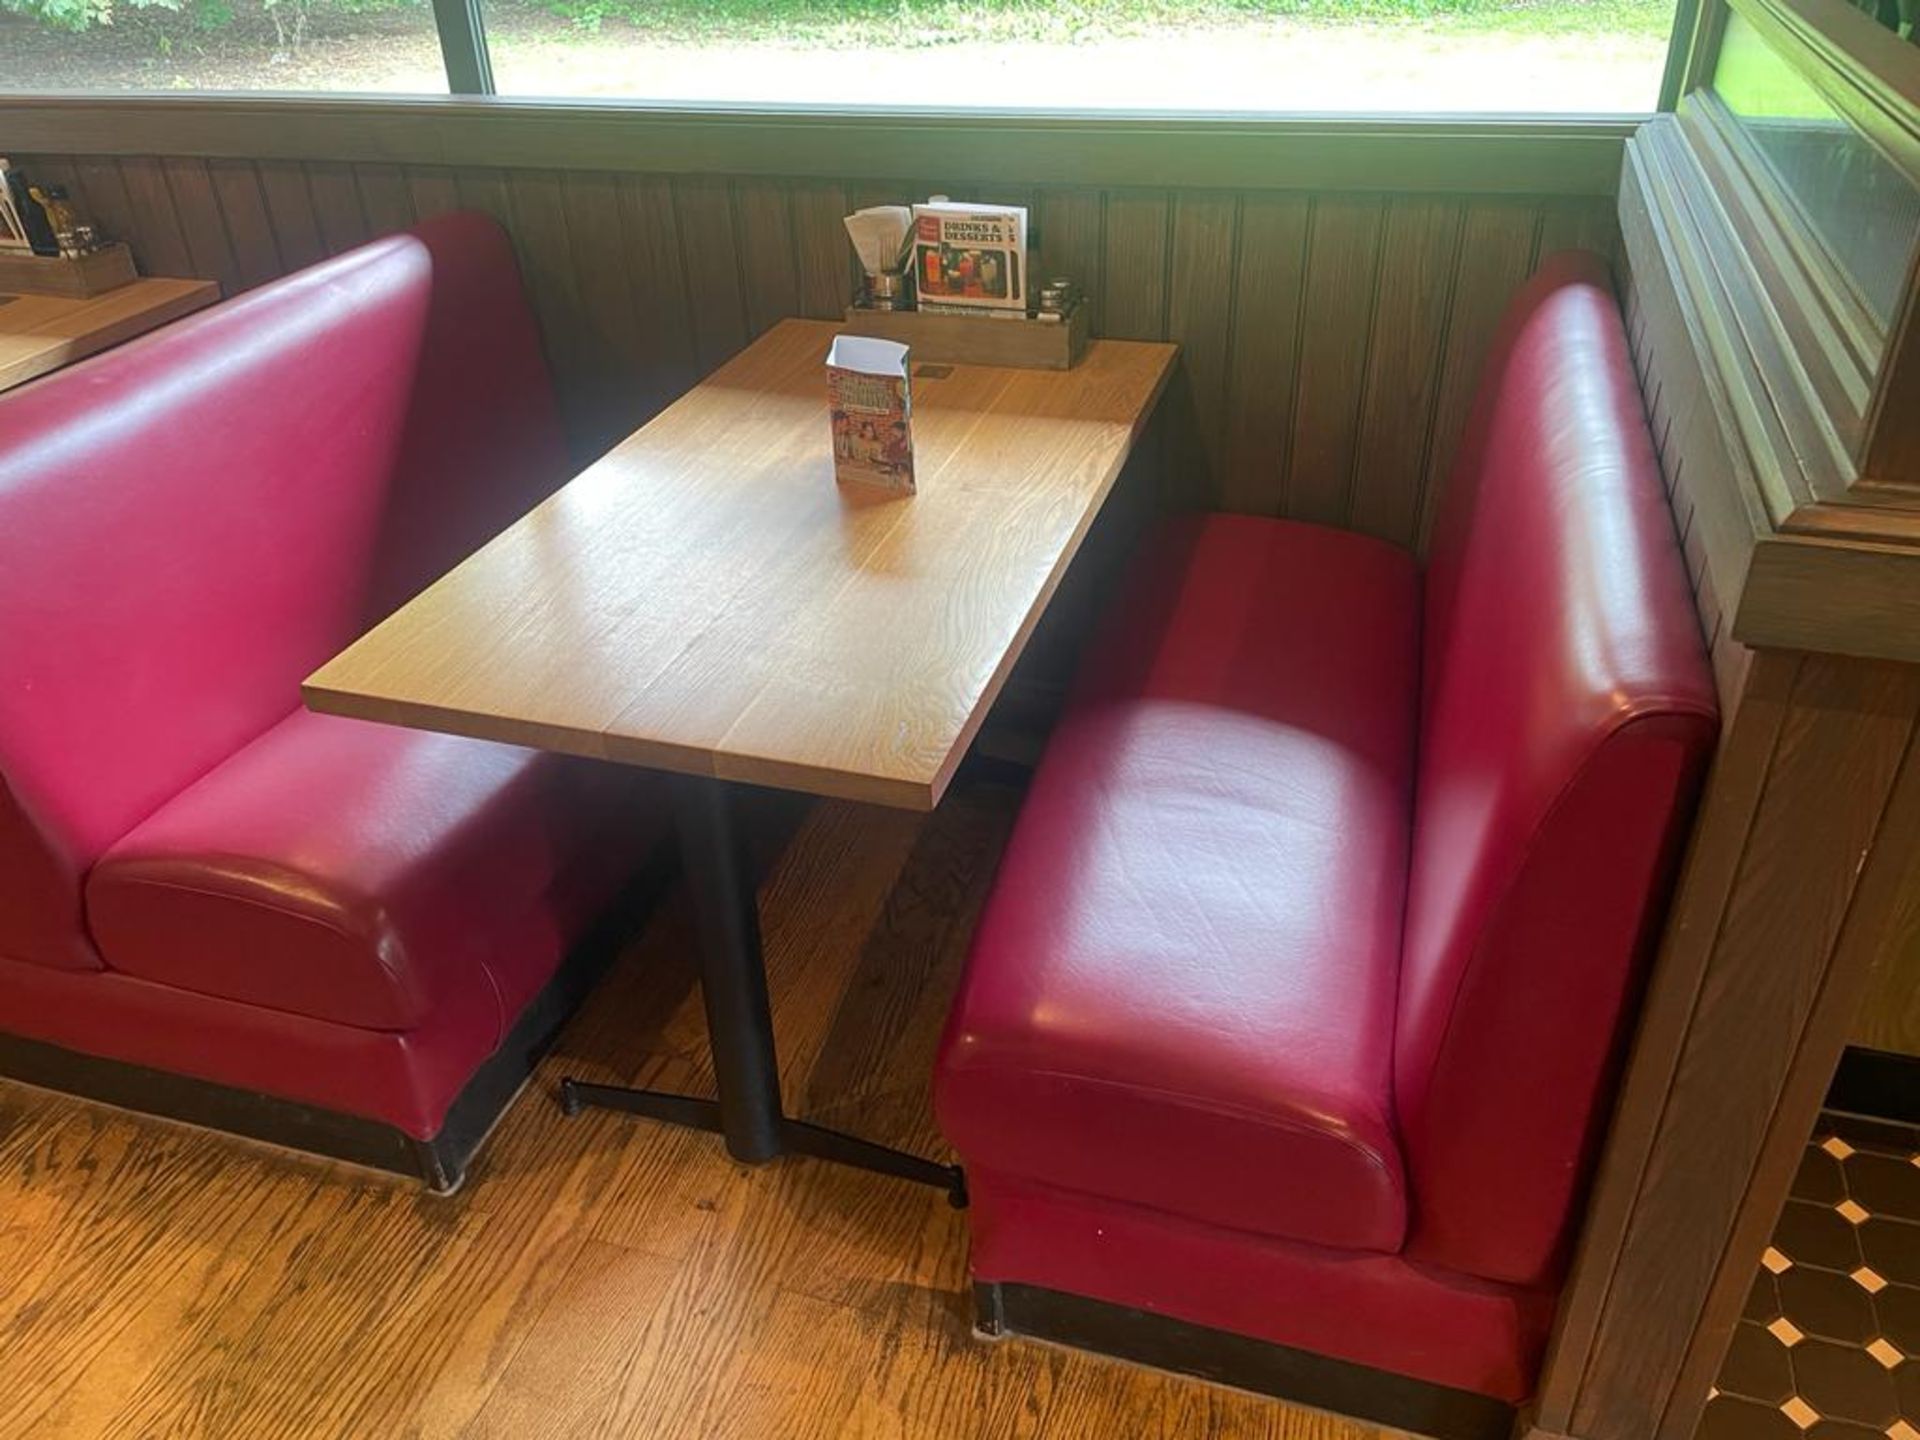 1 x Collection of Restaurant Booth Seating in a Red Faux Leather Upholstery - Image 6 of 8